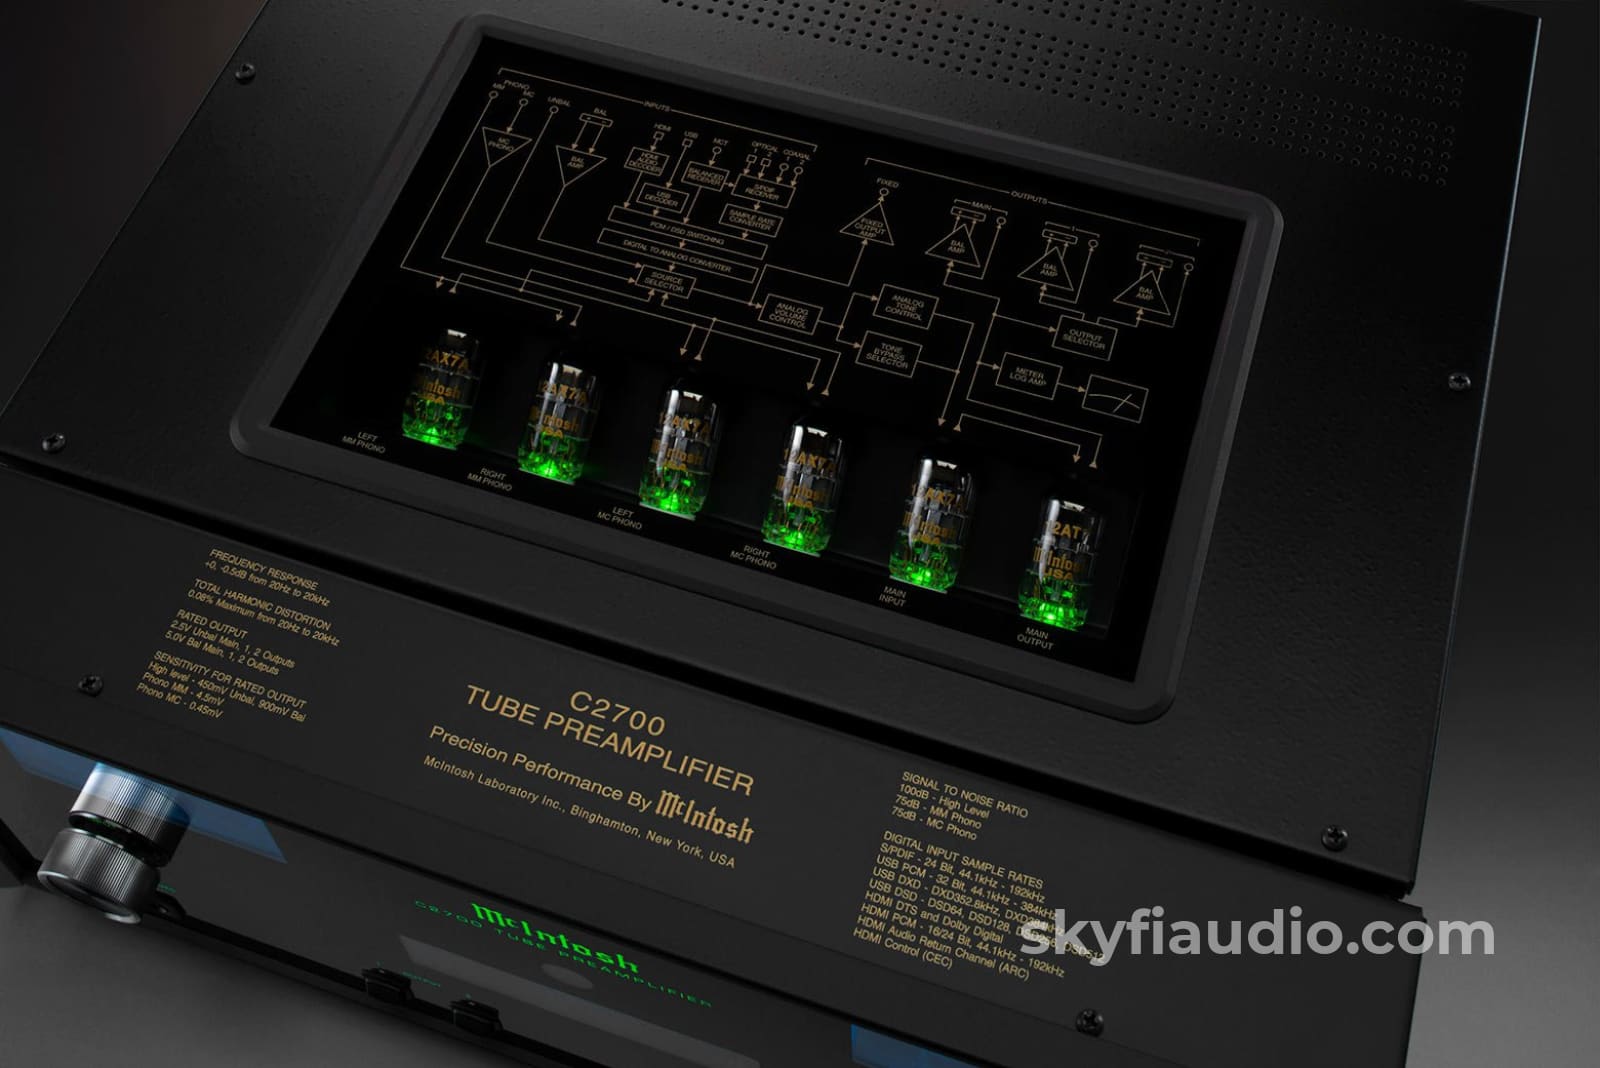 Mcintosh C2700 Tube Preamplifier And Dac